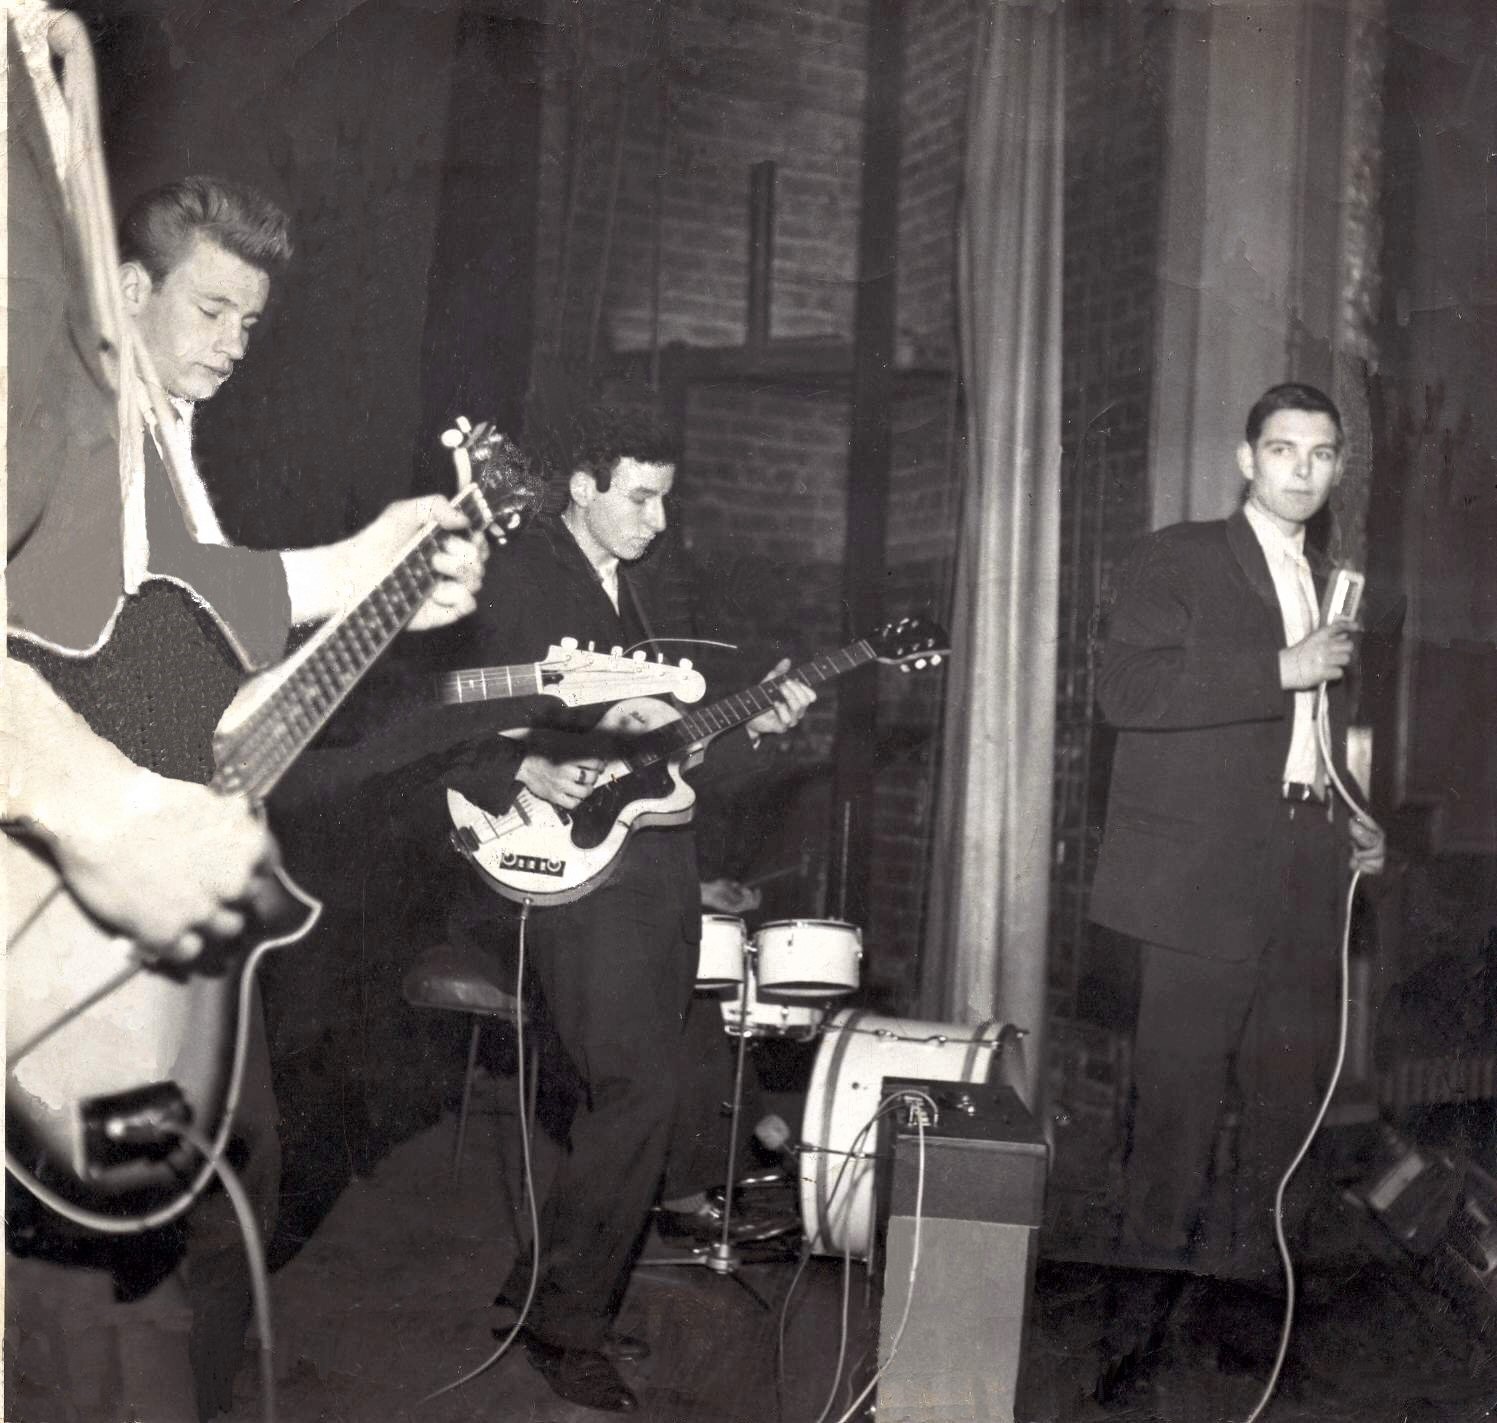 The Renegades performing at The Hippodrome c1961 - Kevin Hughes, Ron Nicholson, Roy McMahon, Don Foulkes, and Steve Lloyd just out of shot.